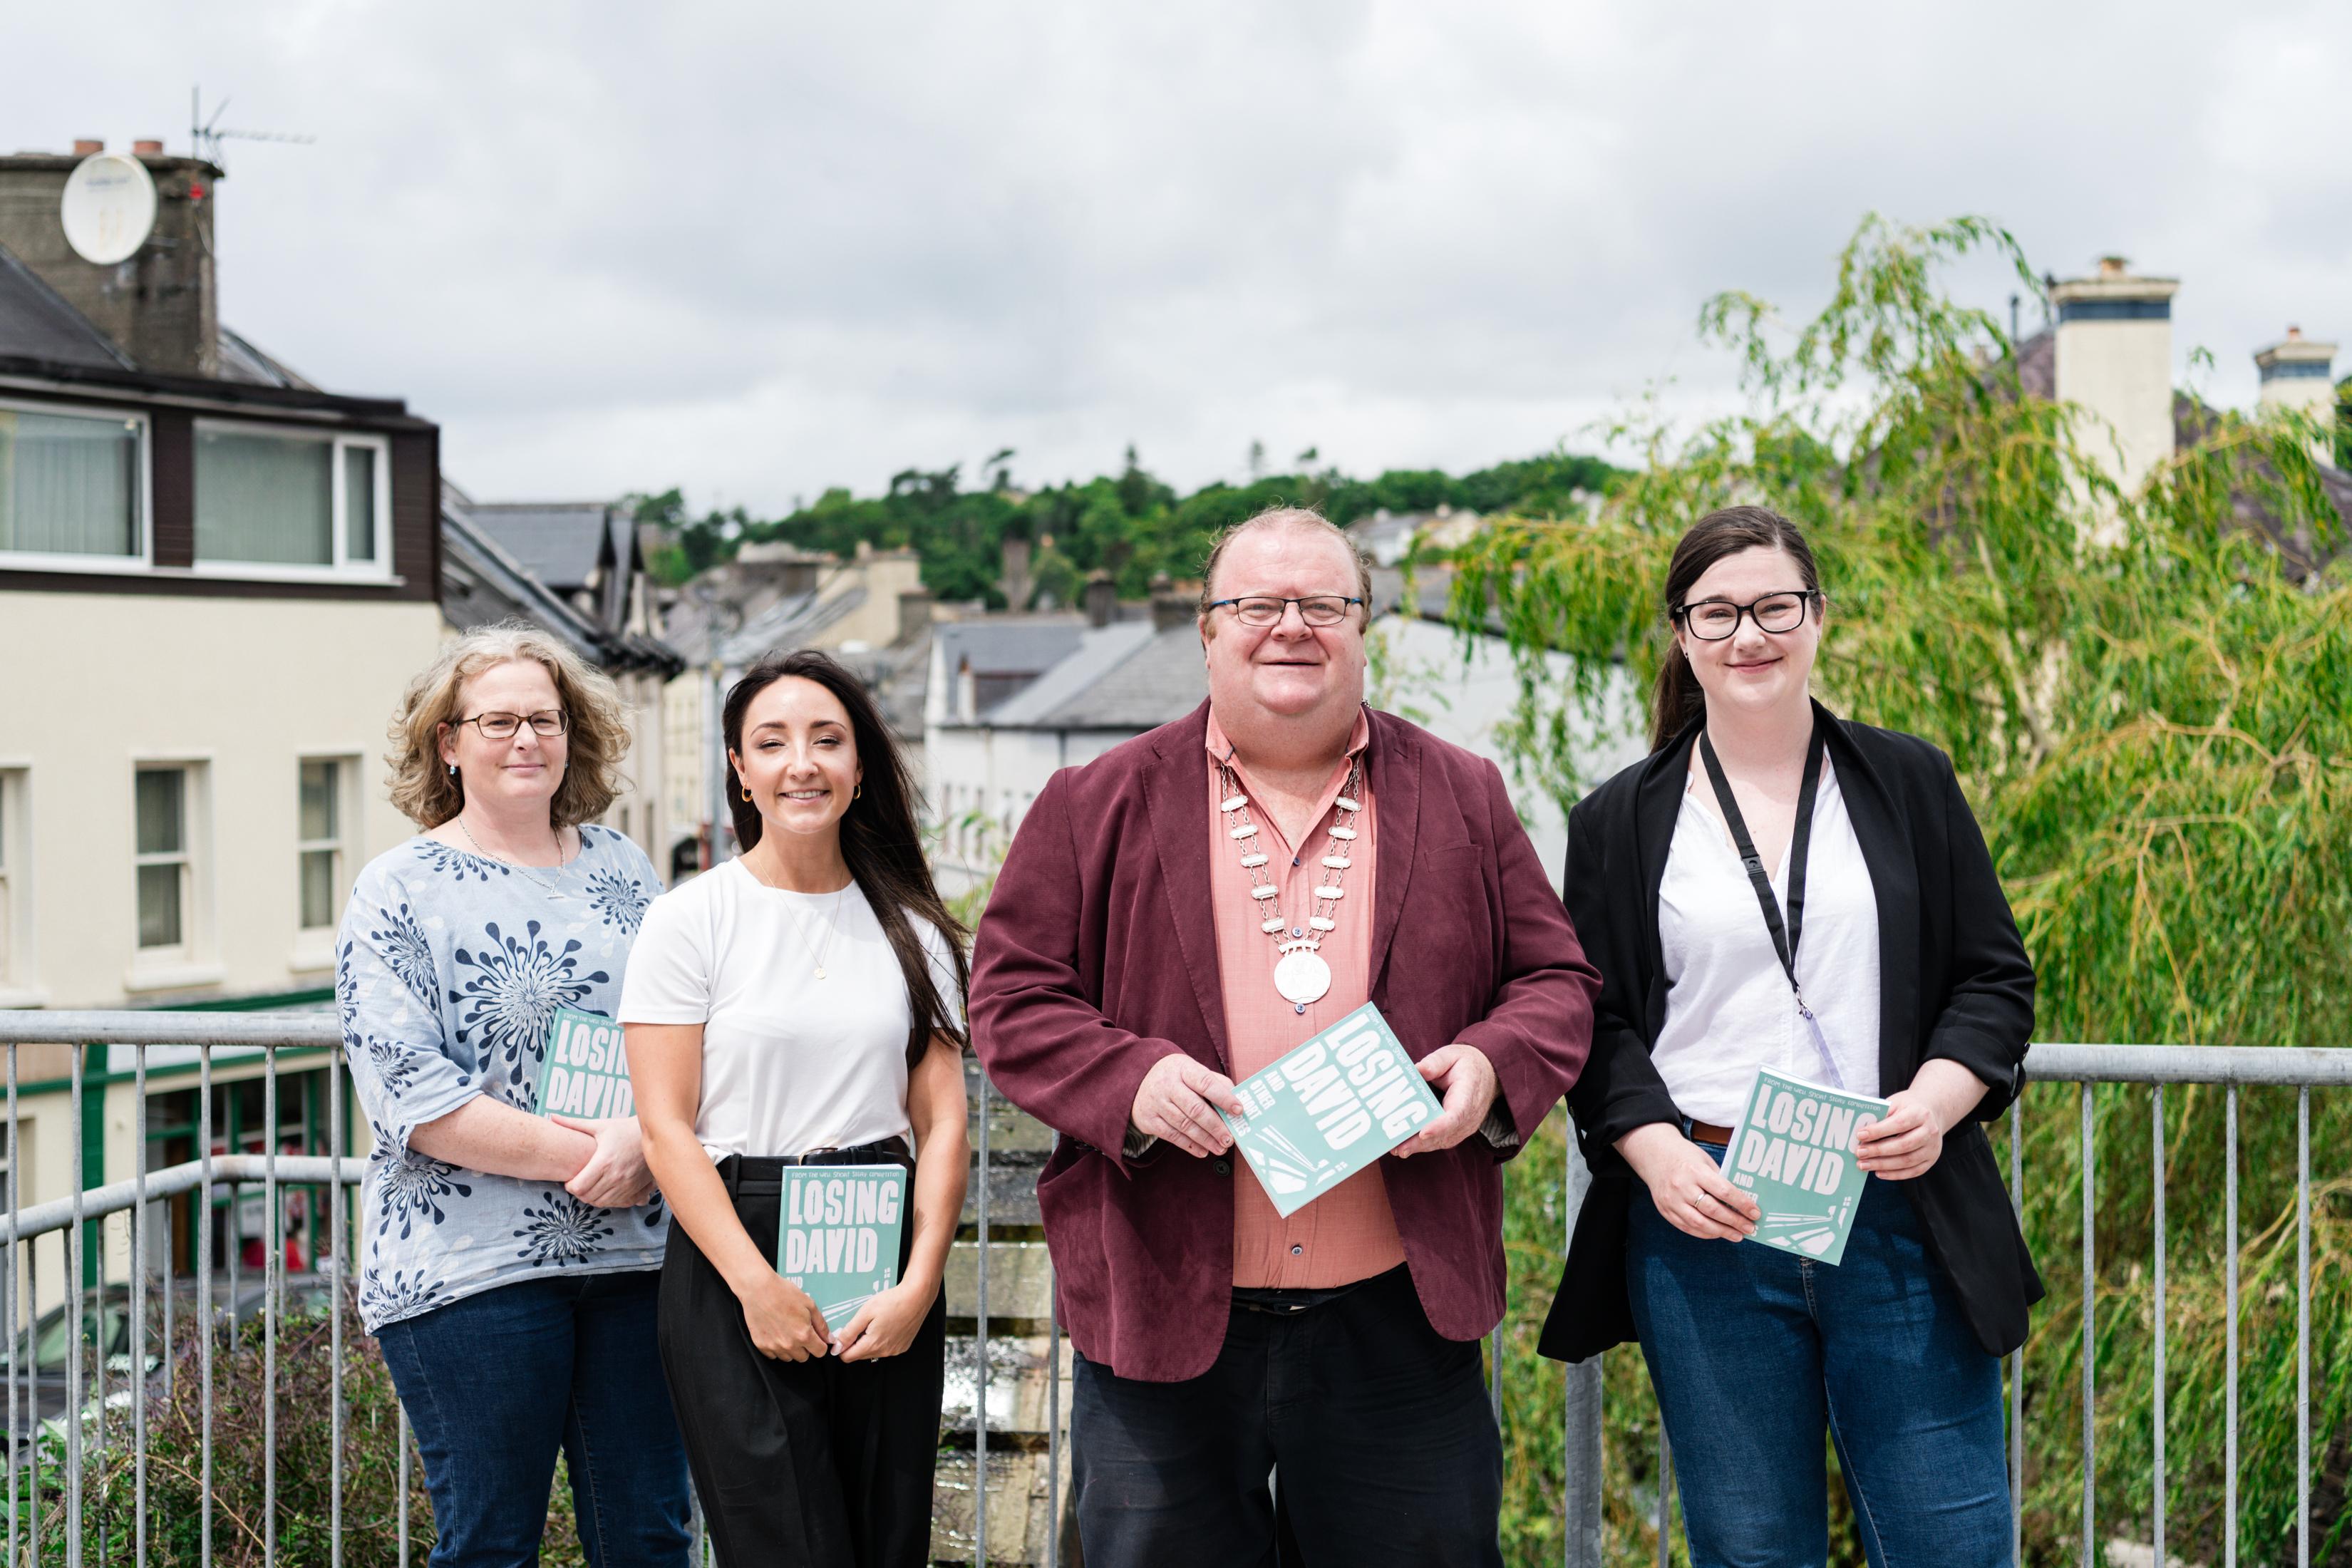 20th Edition of From the Well Short Story Anthology Launched at Bantry Library